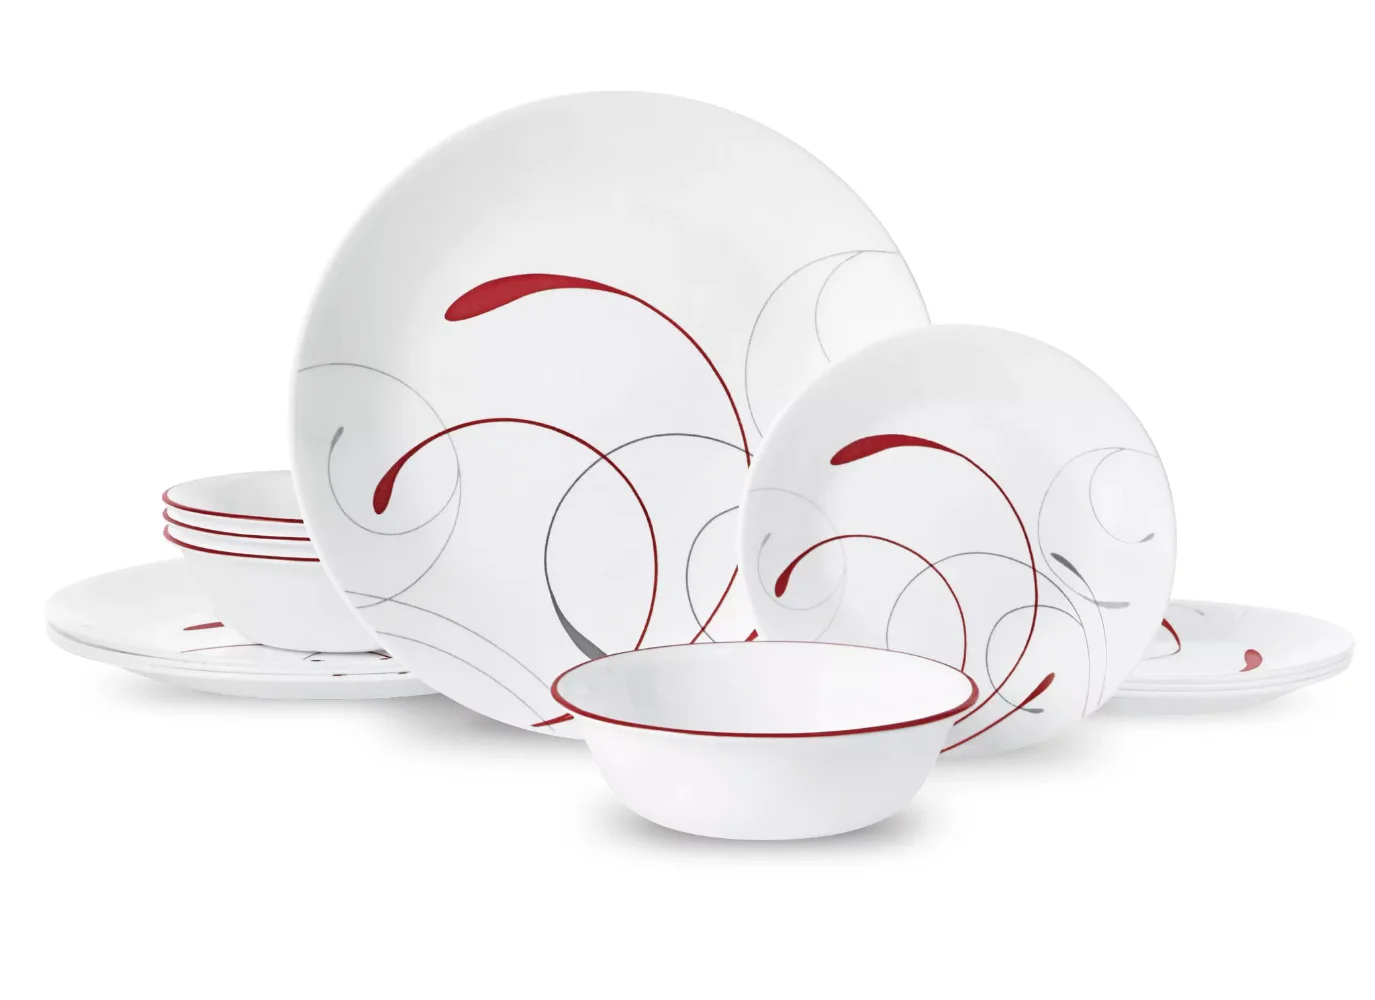 

Plates Dinner Sets Free Shipping Splendor Tableware White and Red Round 12-Piece Dinnerware Set Ceramic Dishes to Eat Dish Plate